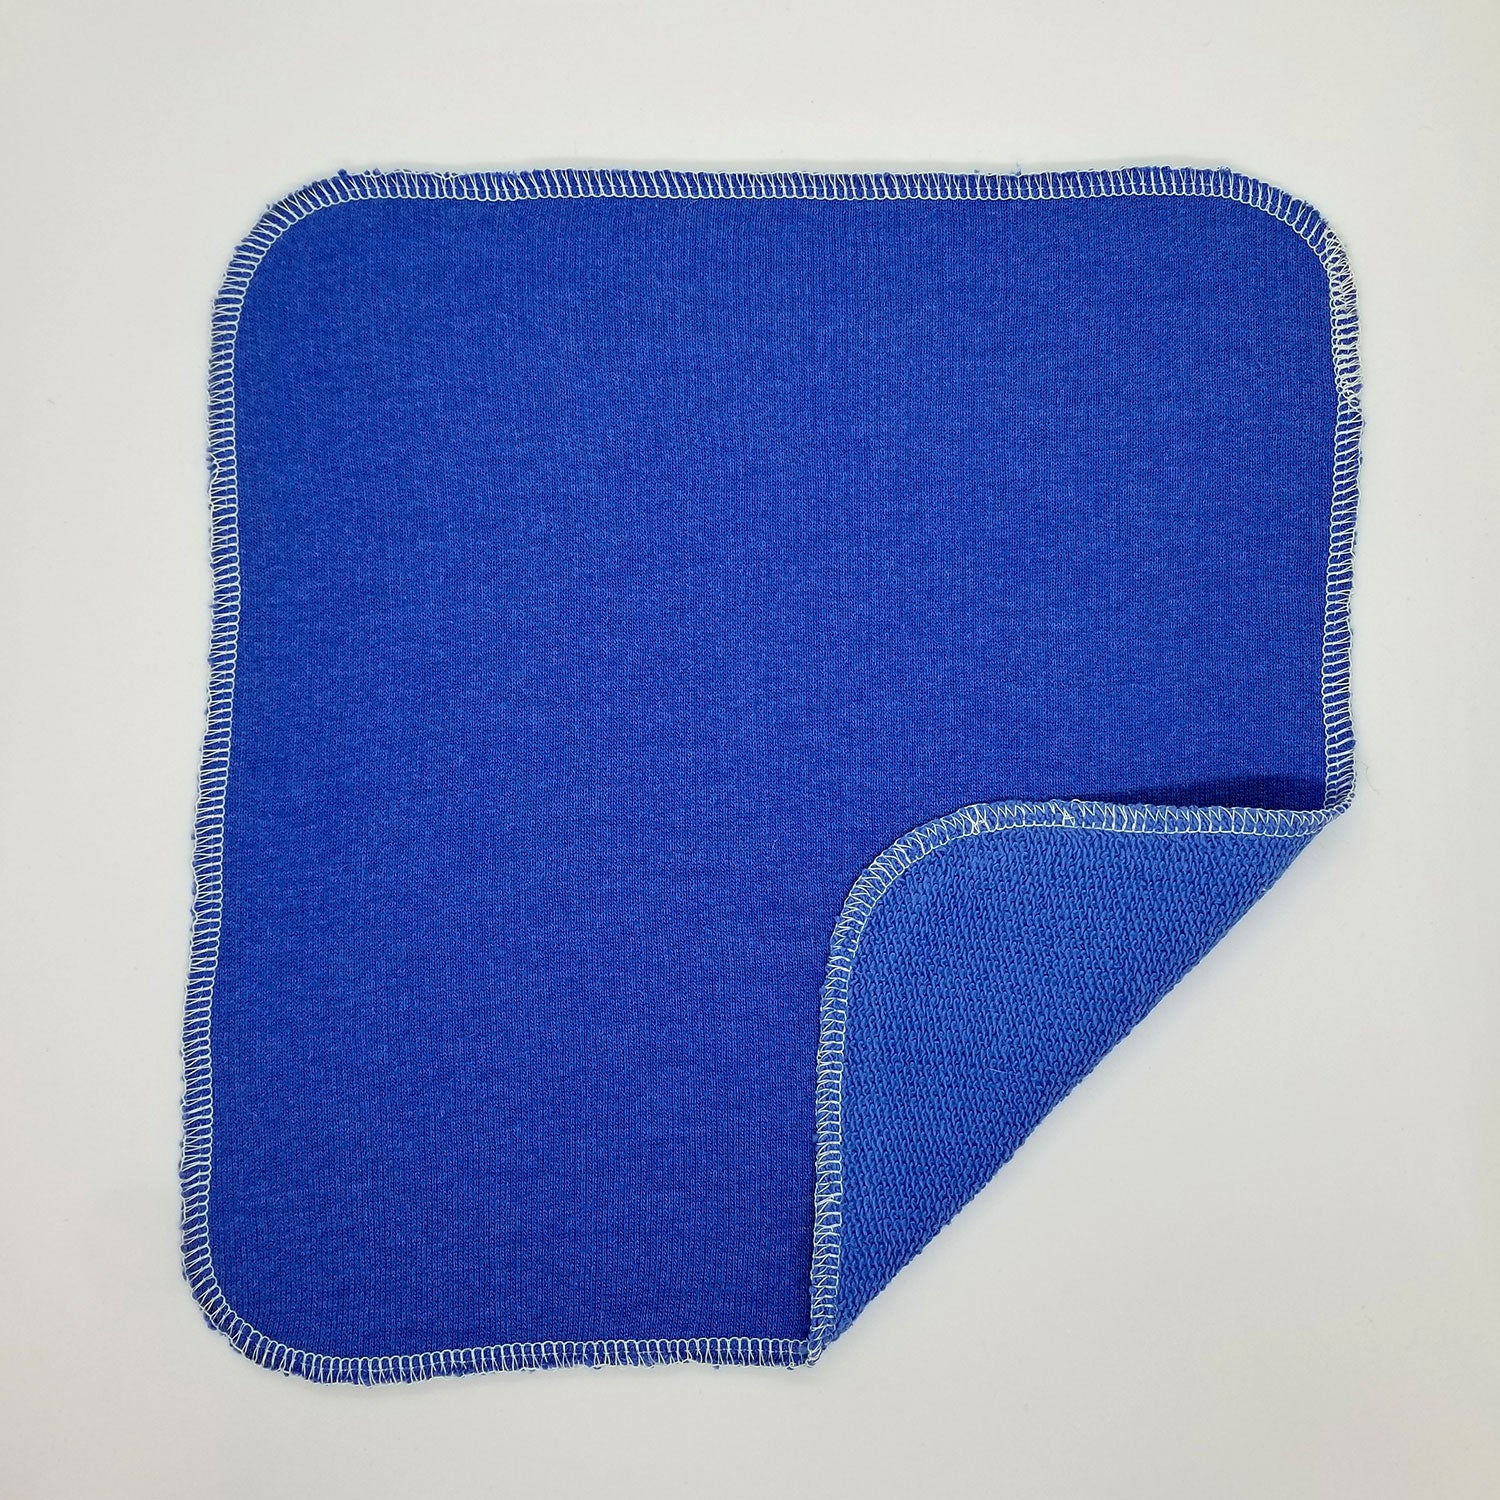 paperless towel blue terry cloth single